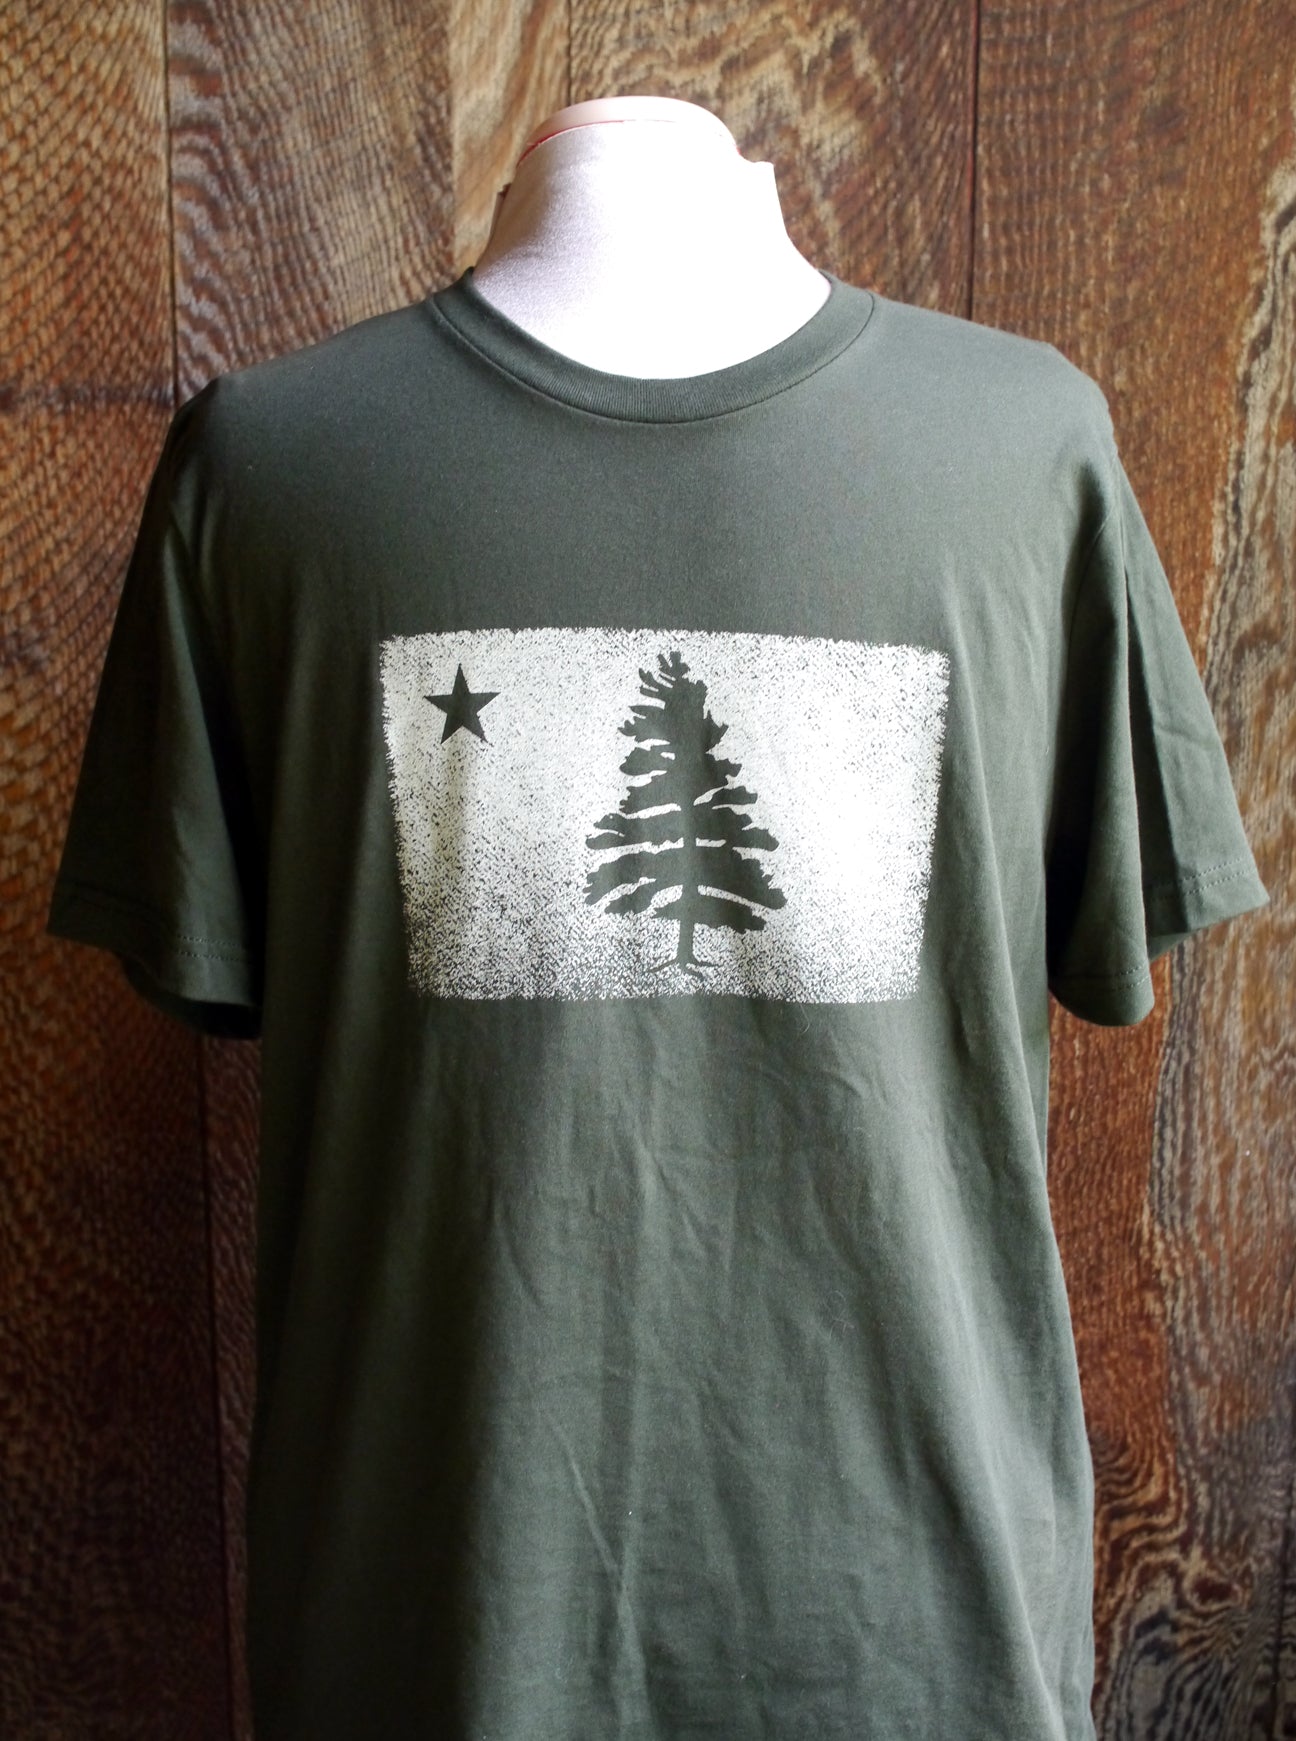 Super soft dark green short sleeve t-shirt with 1901 Original Maine Flag distressed logo screen printed on the chest